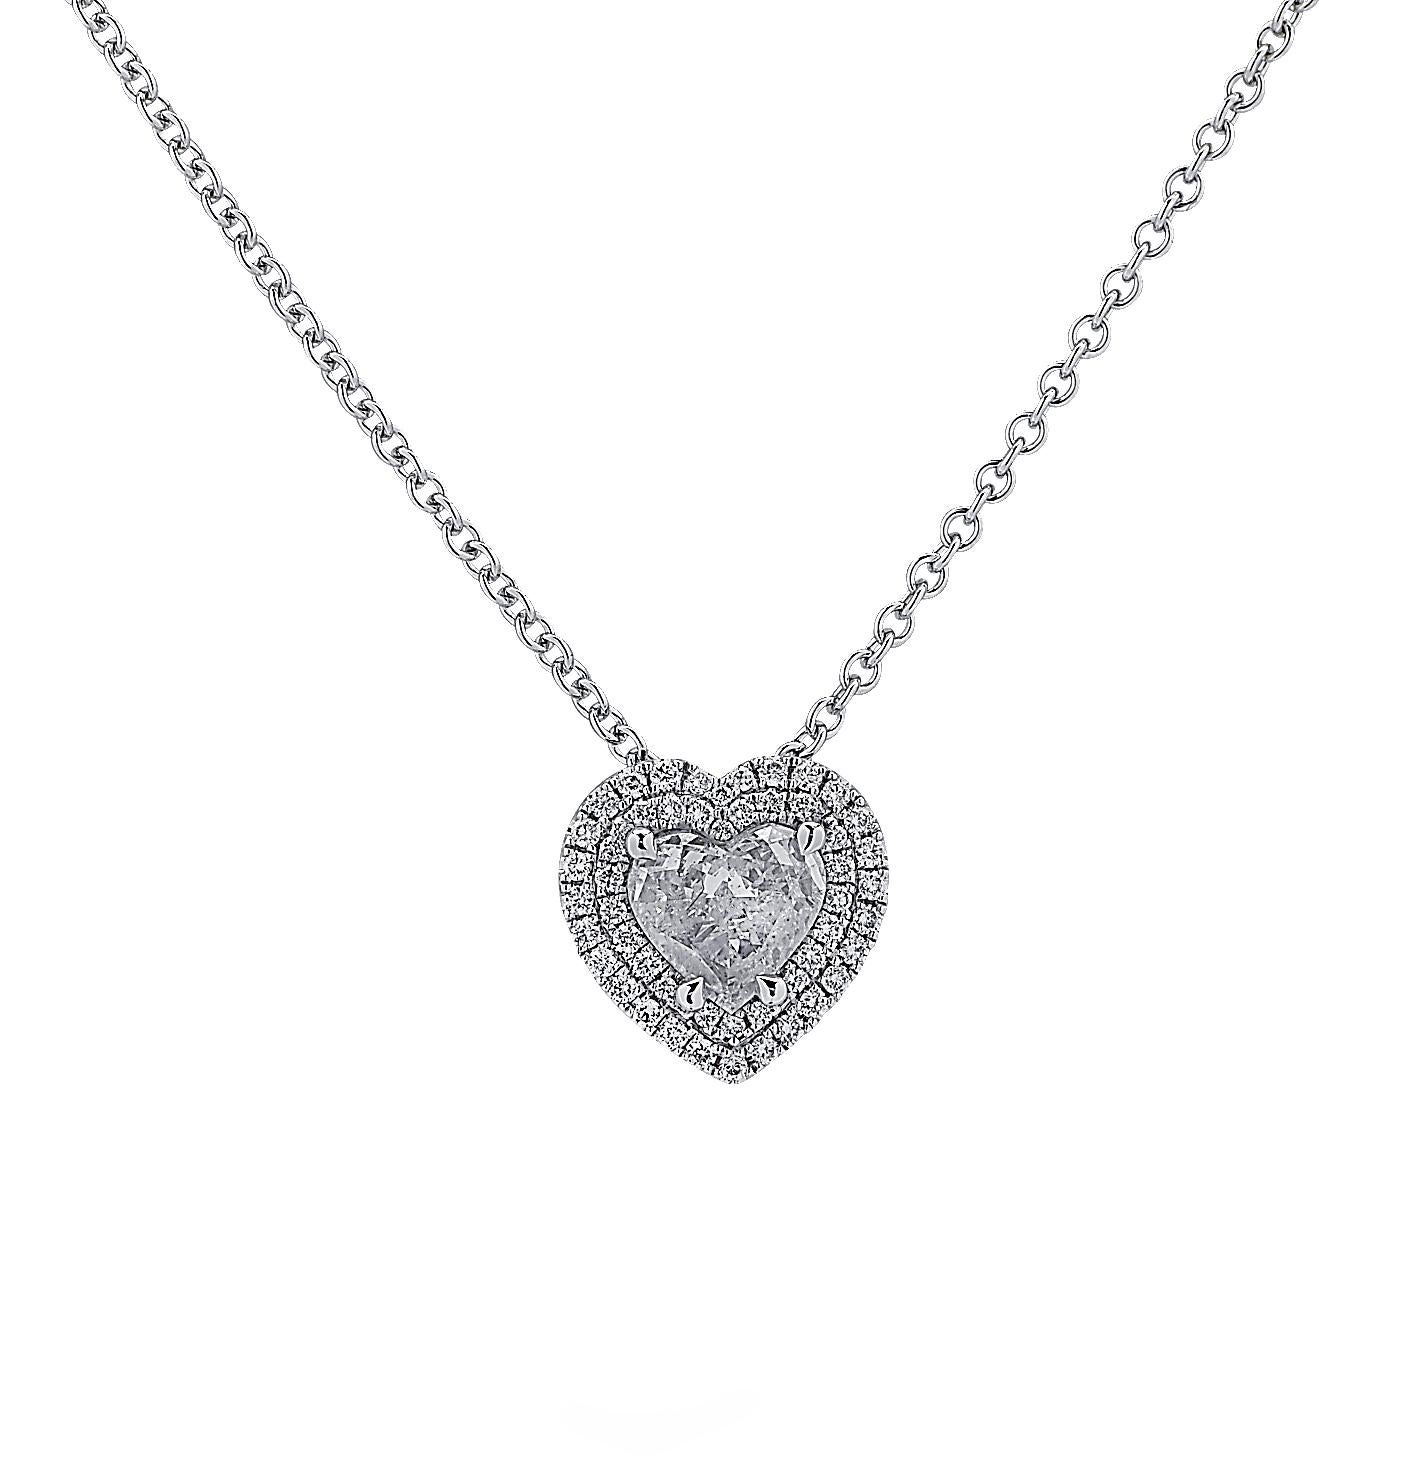 Stunning Vivid Diamonds Necklace crafted in 18 karat white gold, showcasing a heart shaped diamond weighing 0.98 carats, G color, I1 clarity, framed with a double halo encrusted with 43 round brilliant cut diamonds weighing 0.23 carats total, F